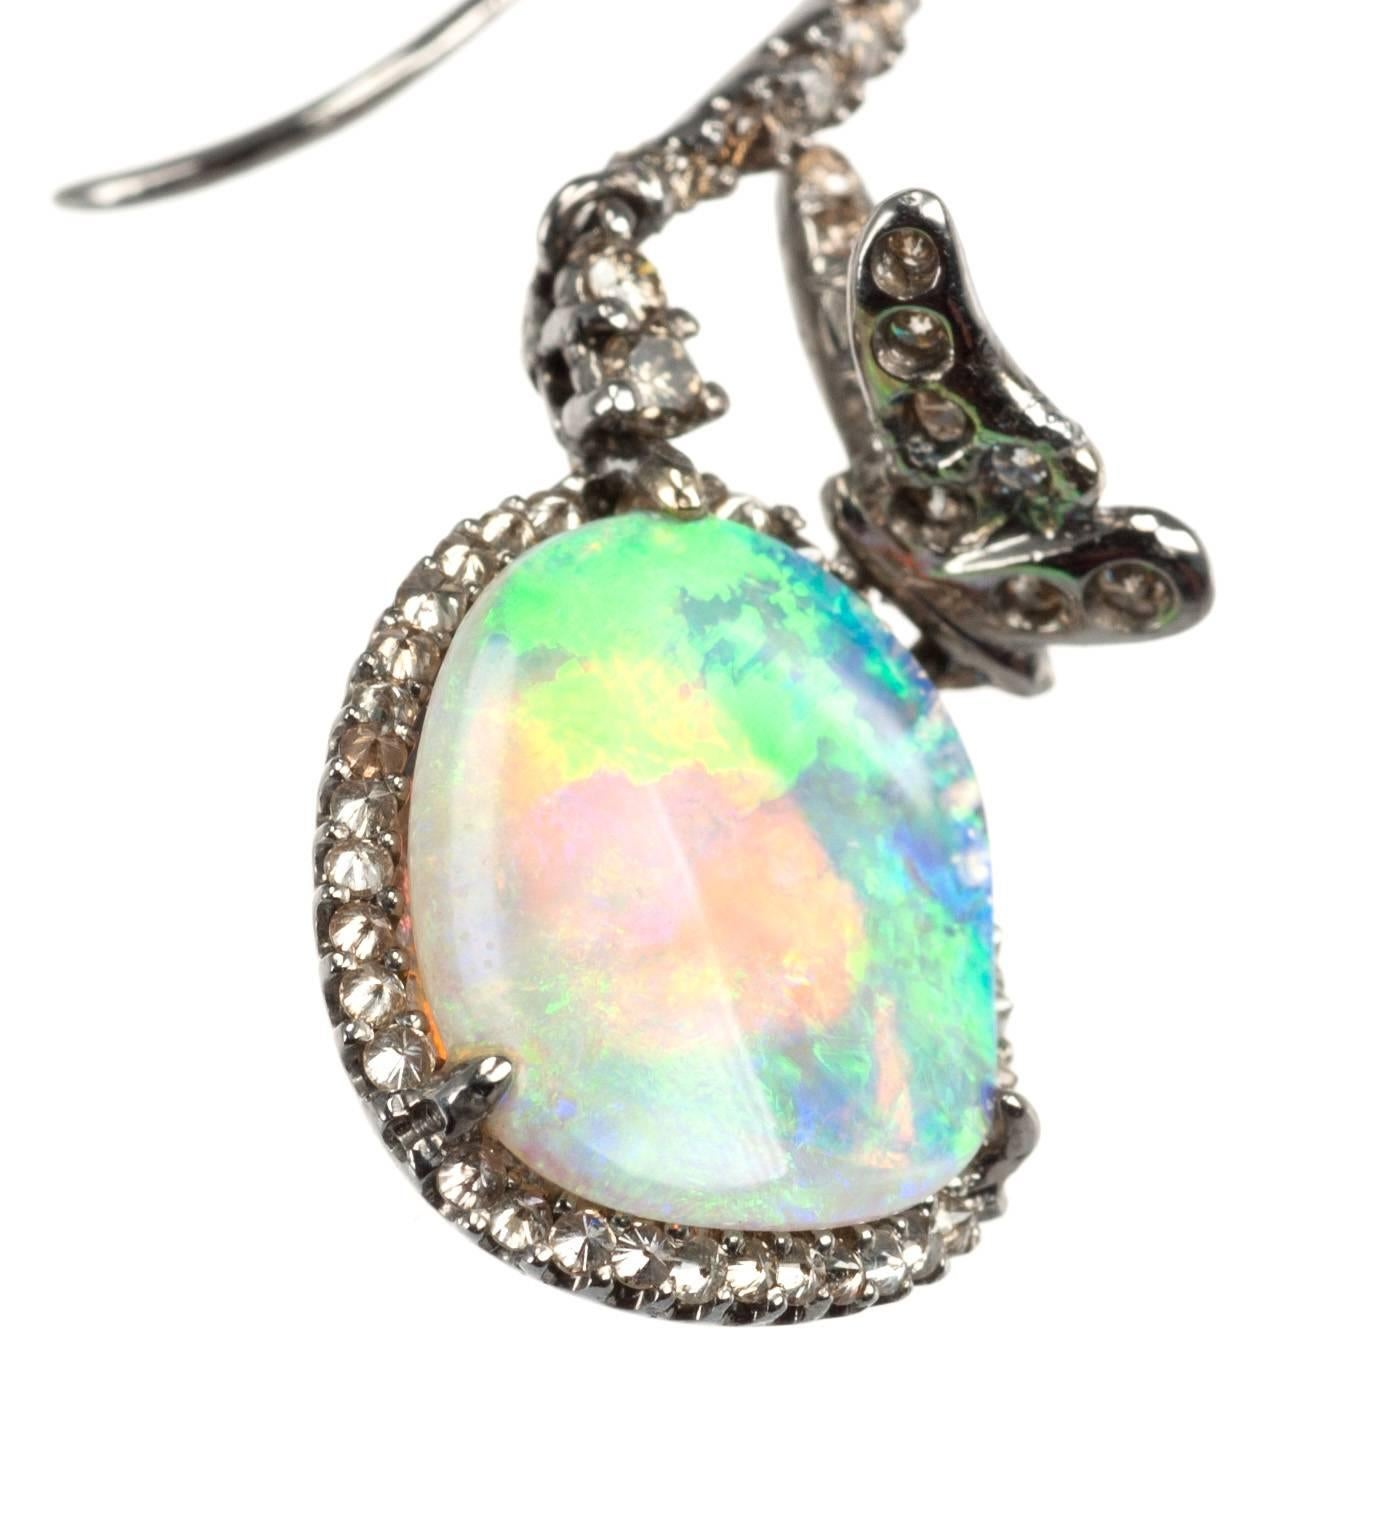 Two organically-shaped opals, weighing 4.22ctw., dangle from the ear with a fiery display of color. Flashes of pink, purple, green and yellow are framed by cognac diamonds weighing 1.04 ctw. Each 18-karat white gold earring is graced by a sparkling